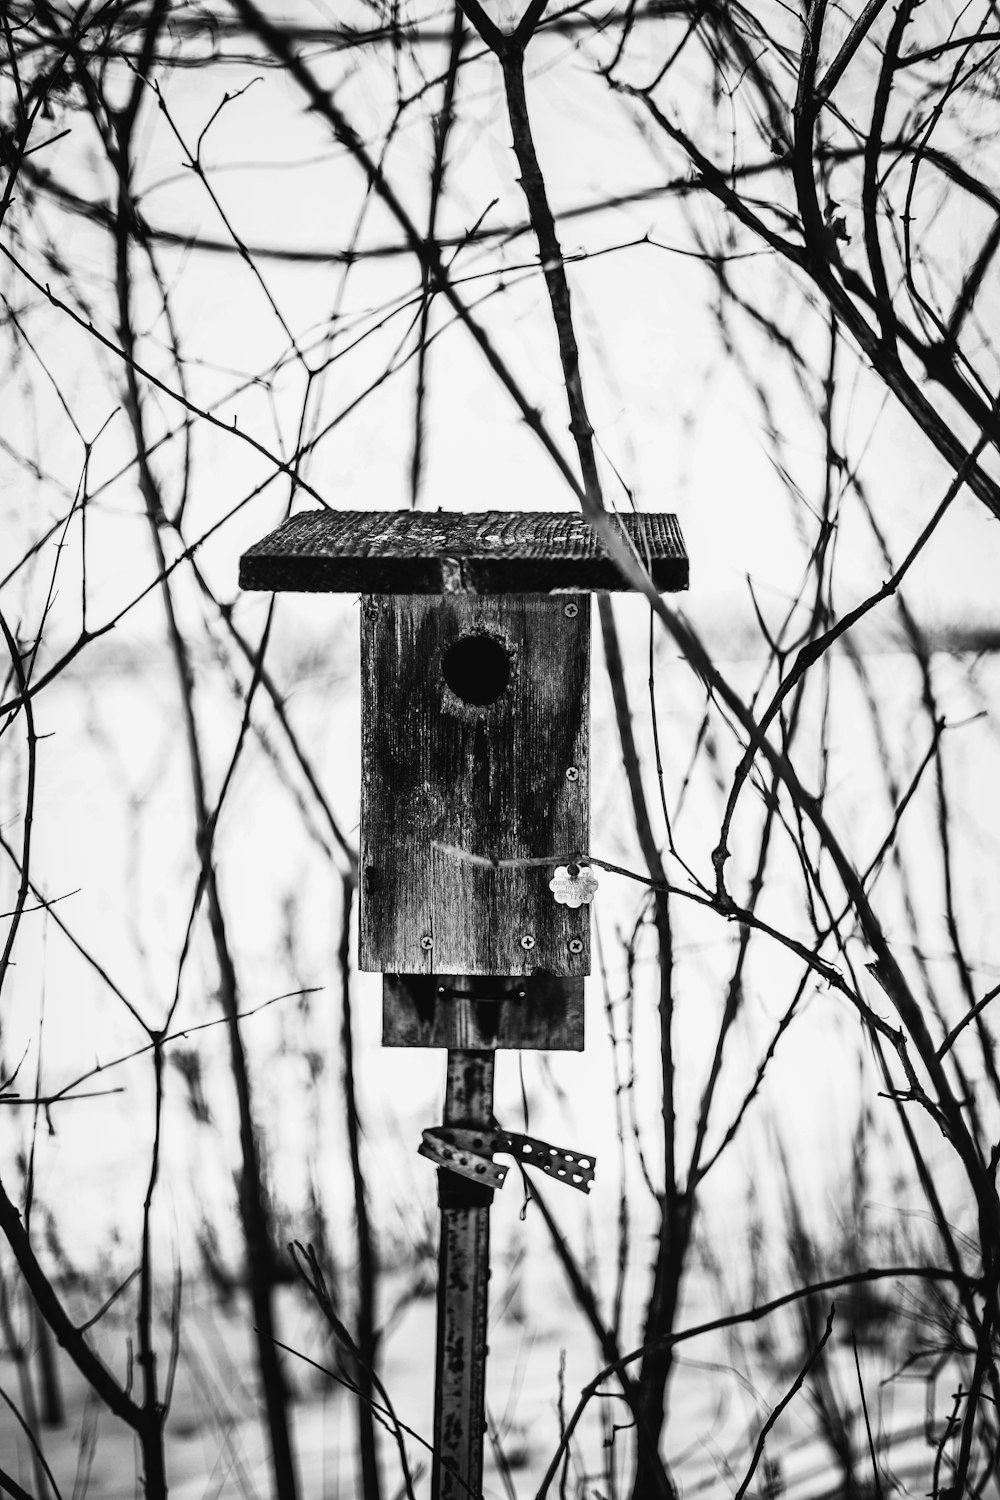 grayscale photo of wooden birdhouse